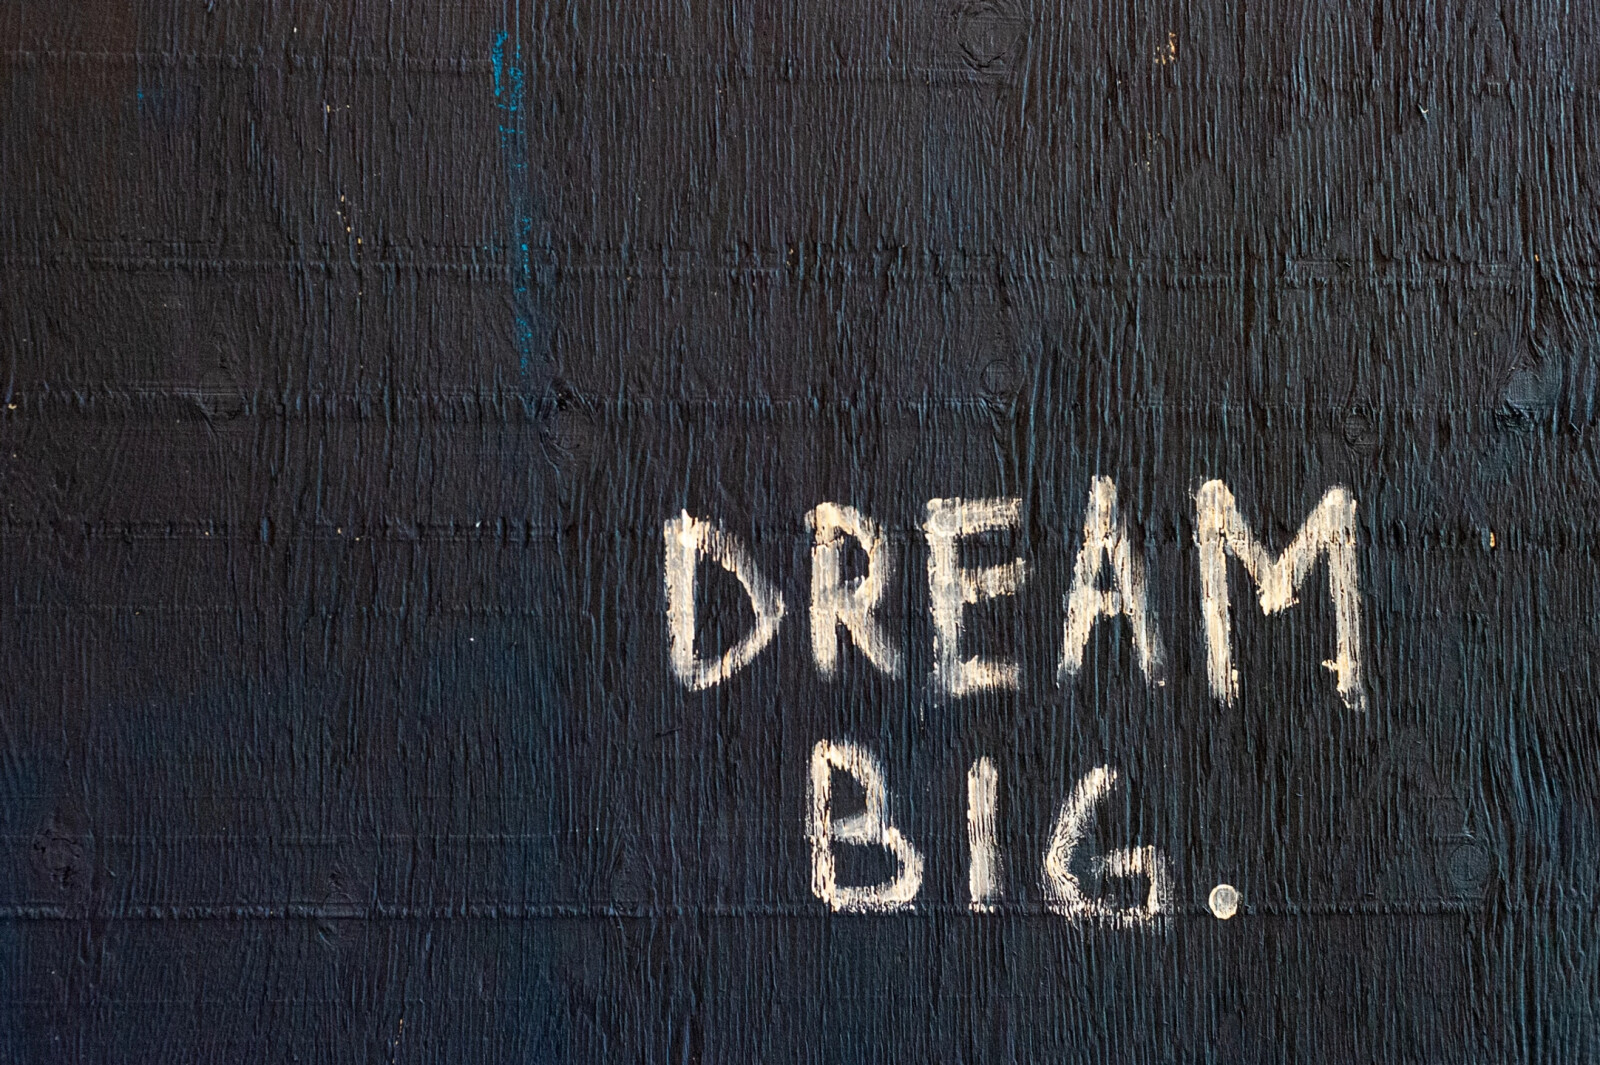 Seven Ways To Accelerate Your Dreams